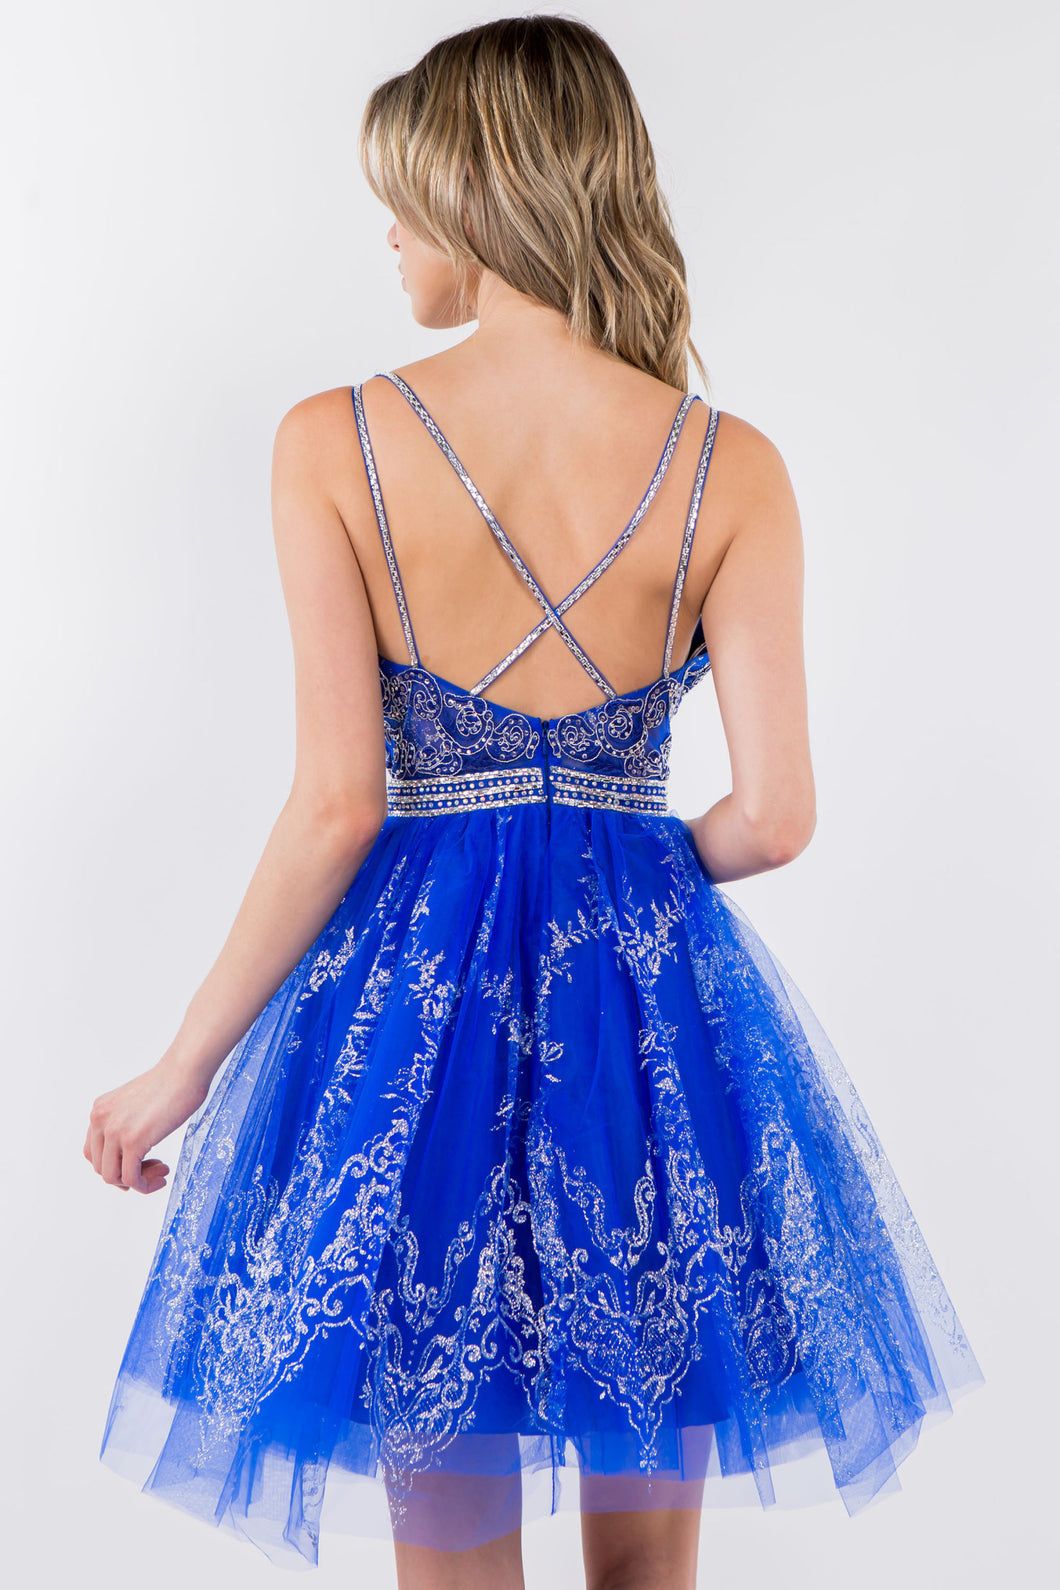 Sky Blue V-Neck Lace-Up Homecoming Dress with Appliques gh1779 –  girlhomeshops